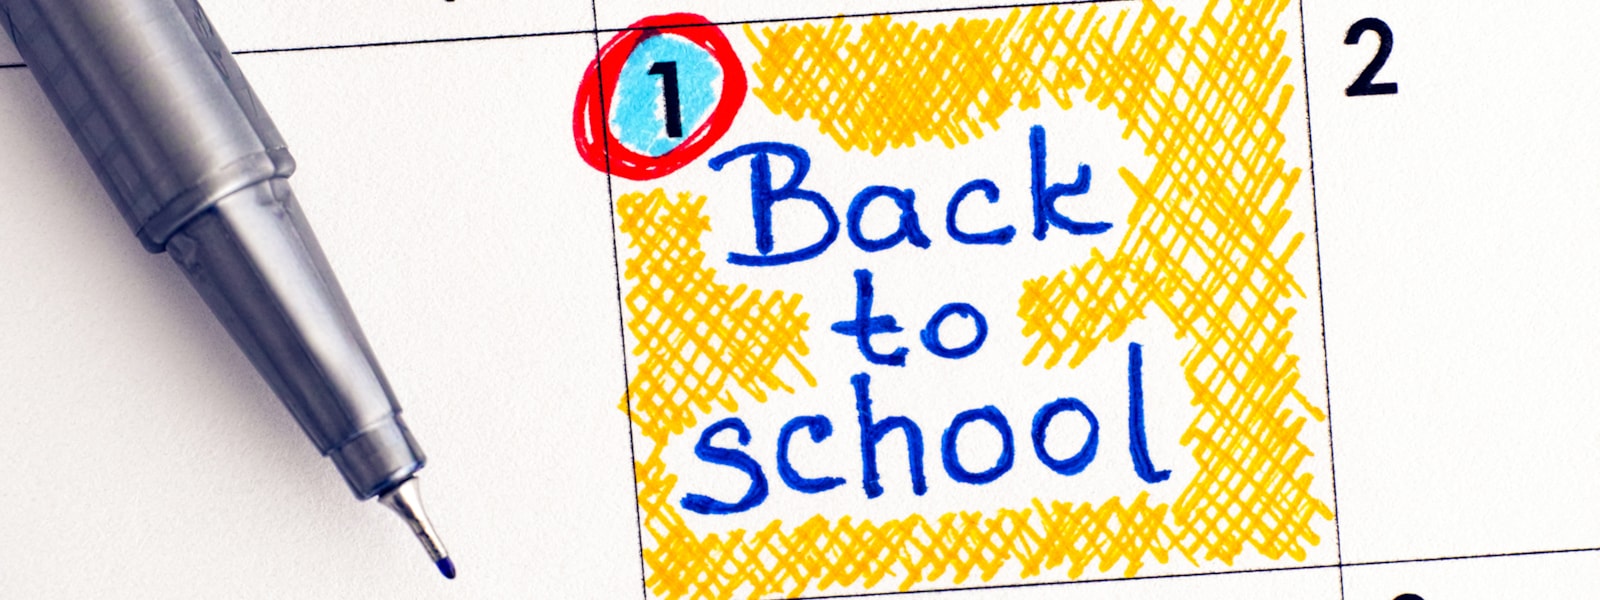 calendar with date circled and 'Back to school' listed on calendar